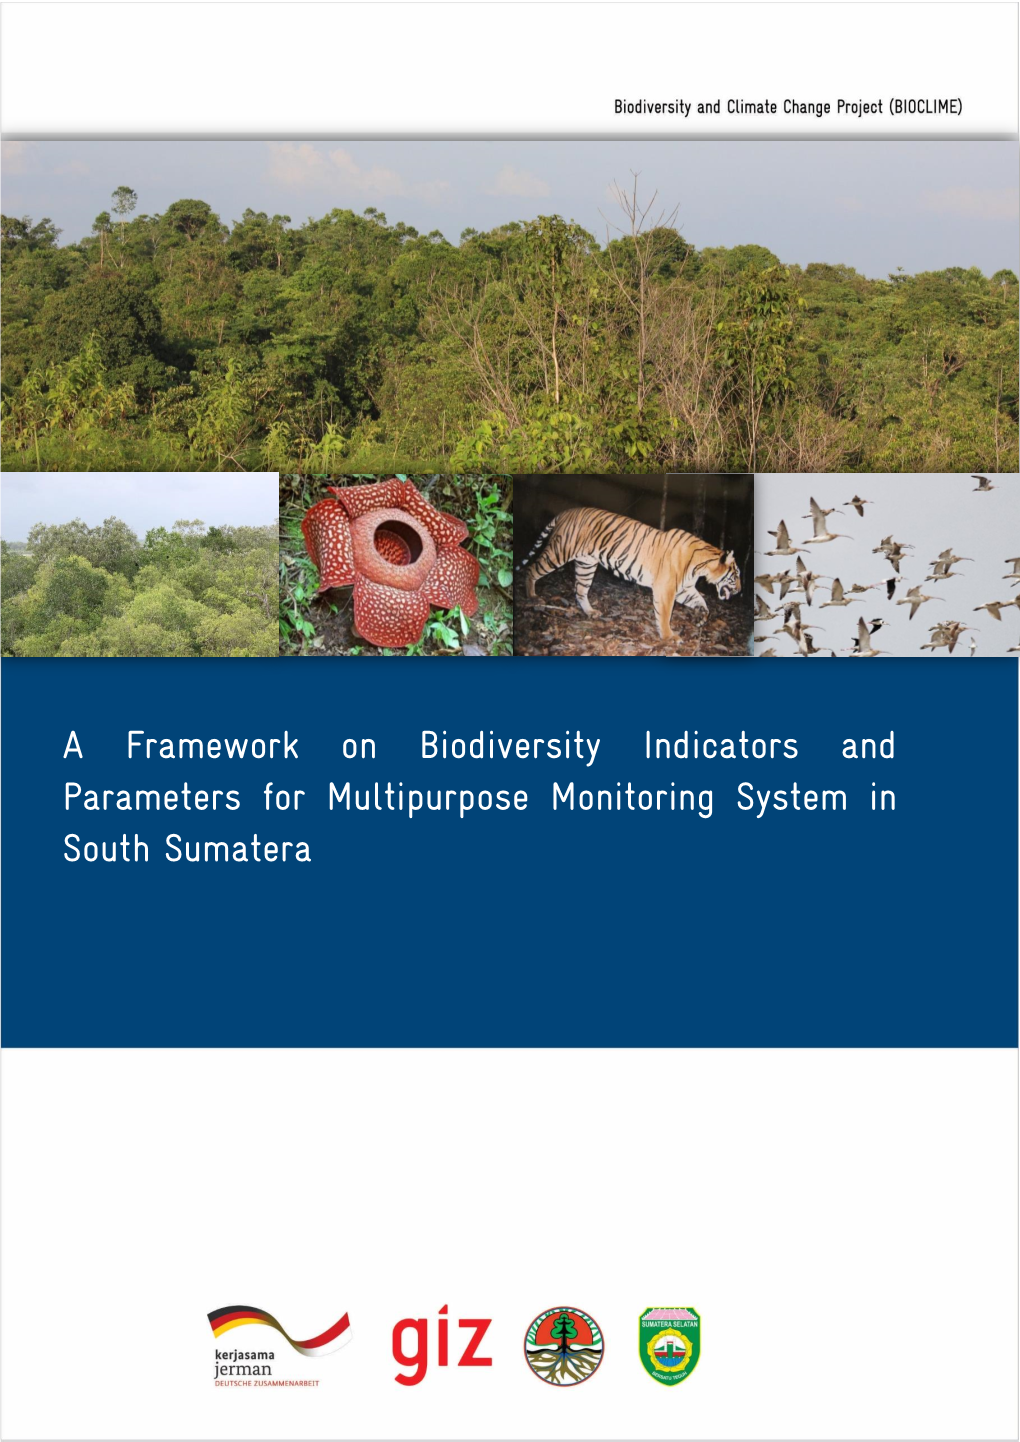 A Framework on Biodiversity Indicators and Parameters for Multipurpose Monitoring System in South Sumatera